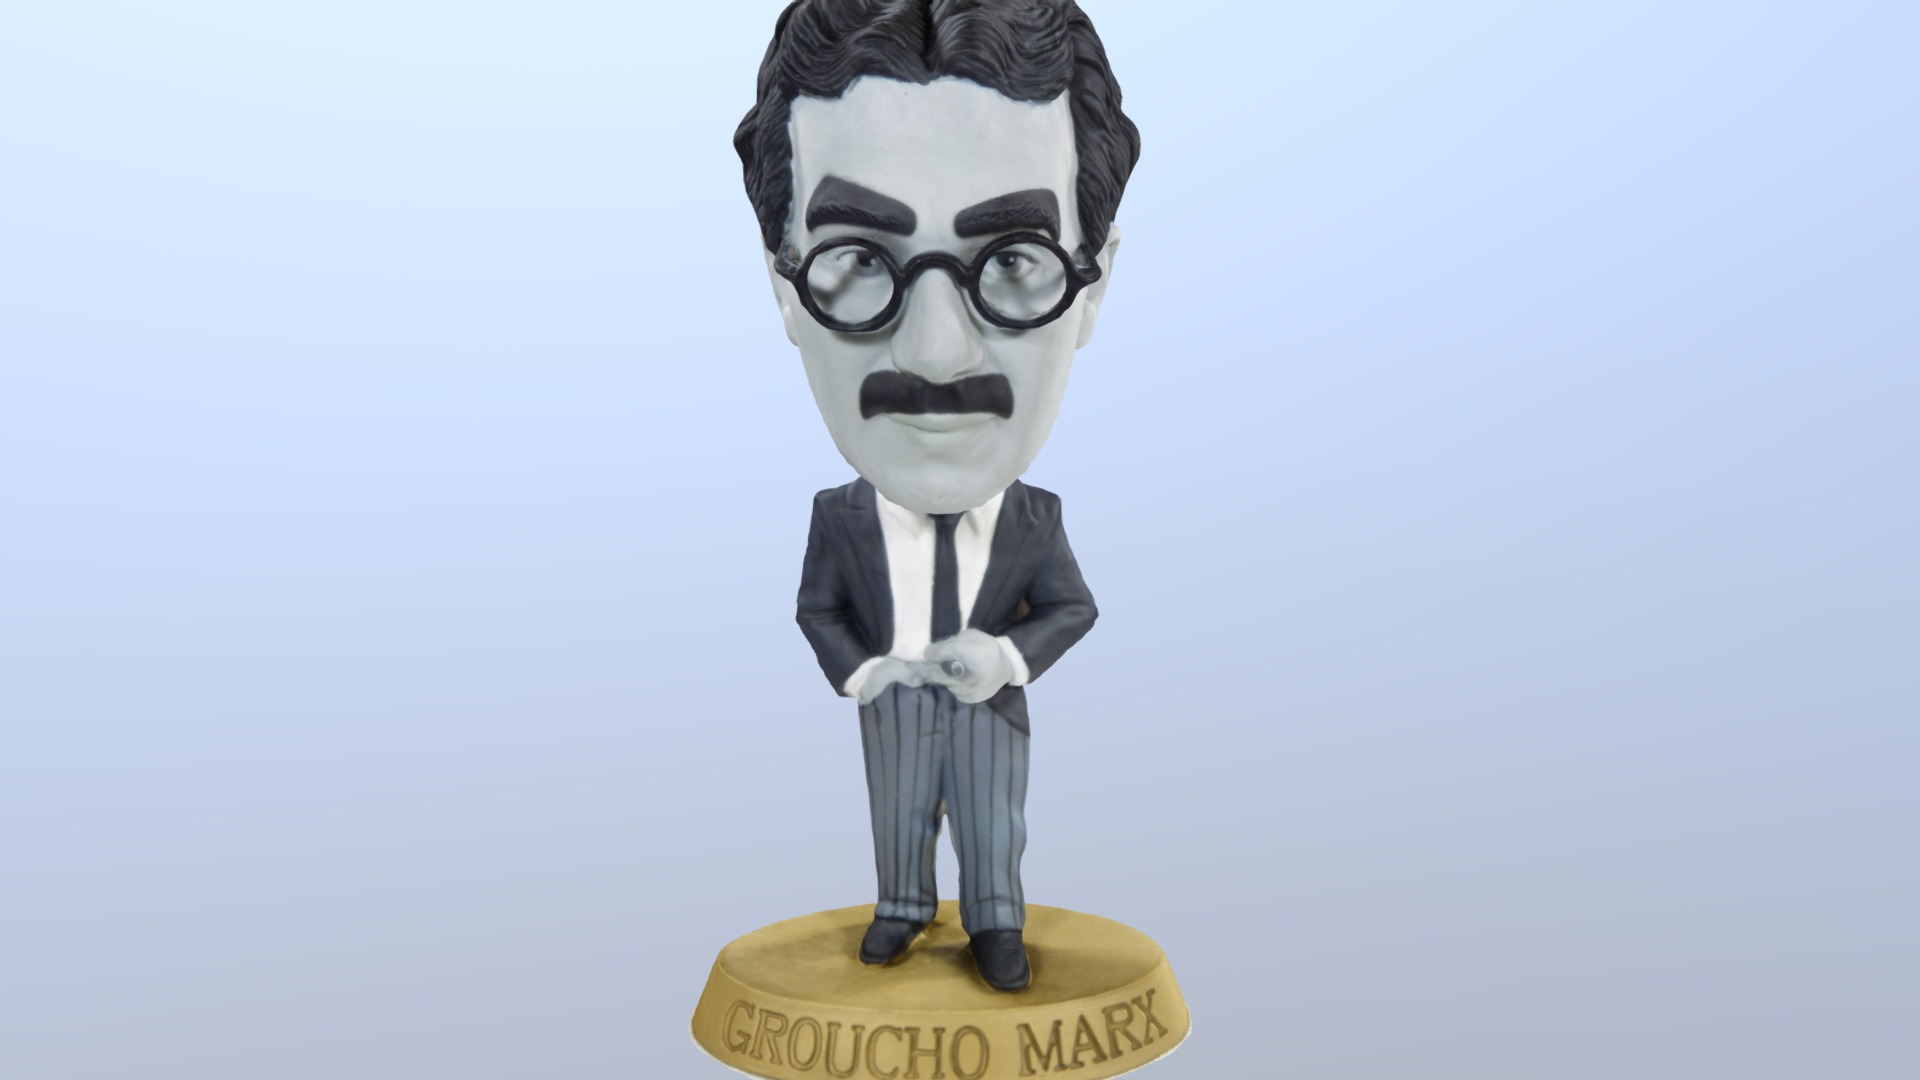 3D model Groucho Marx bobblehead - This is a 3D model of the Groucho Marx bobblehead. The 3D model is about a person wearing glasses.